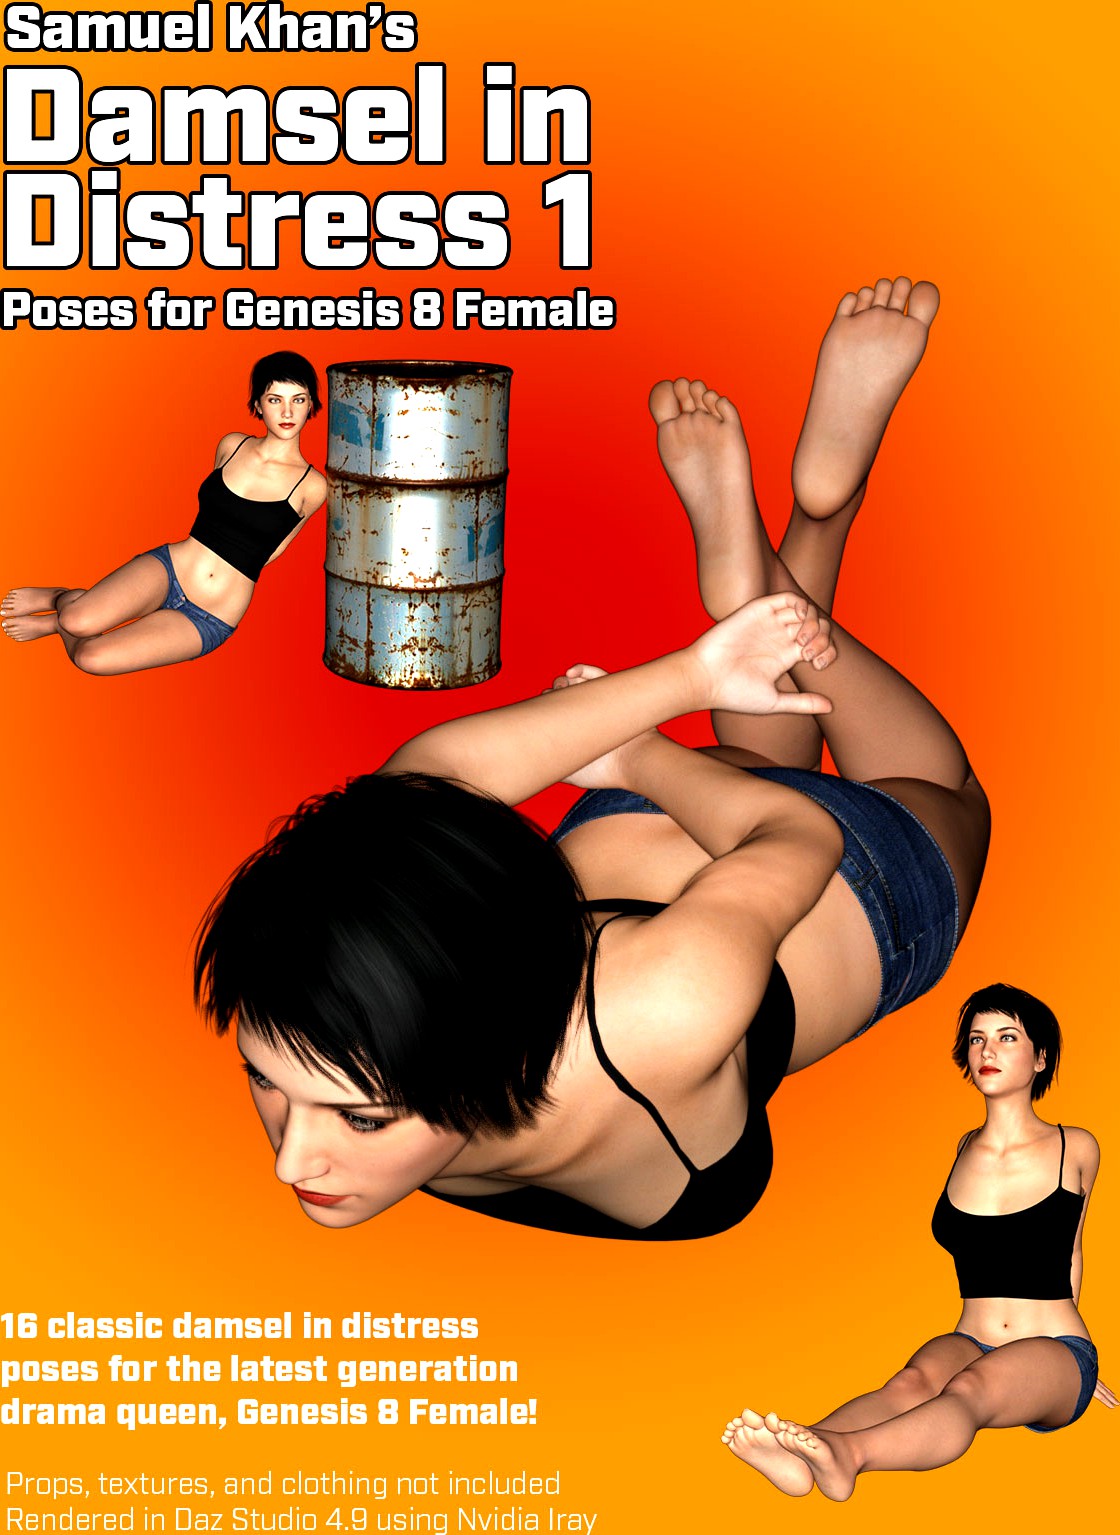 Samuel Khan's Damsel in Distress Poses 1 for G8F